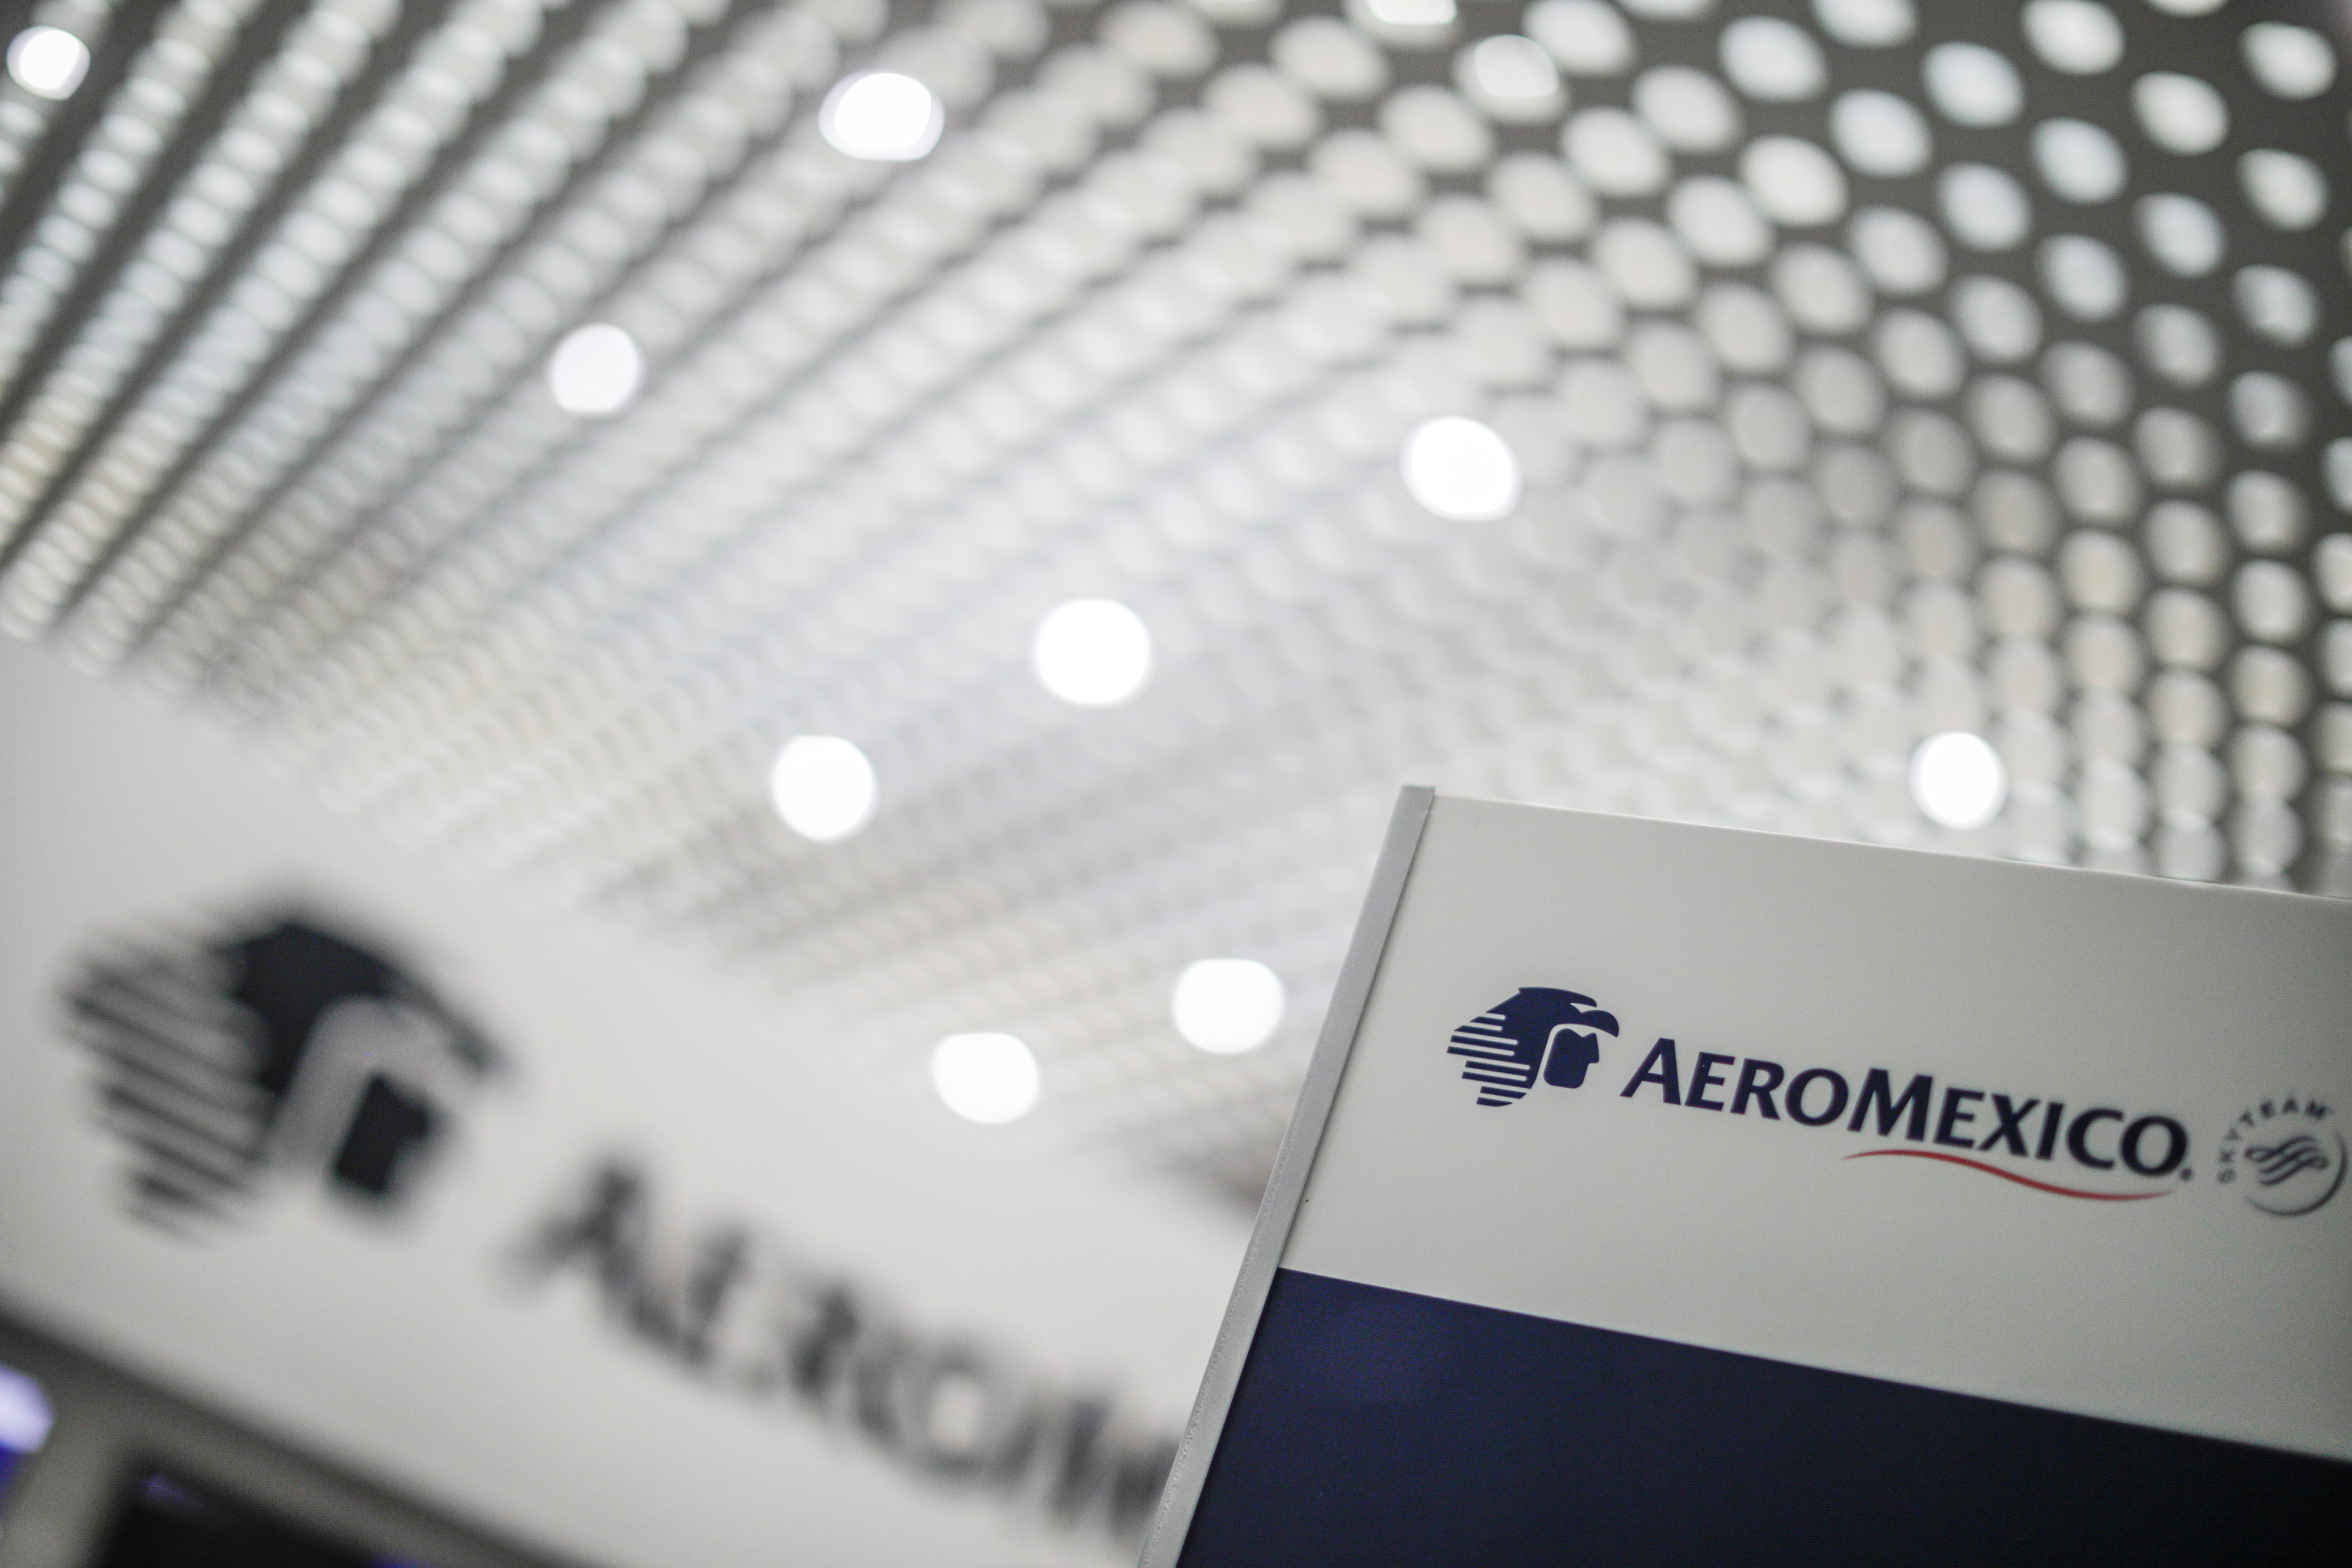 The logo of Mexican airline Aeromexico is pictured on a sign at the Benito Juarez International airport in Mexico City